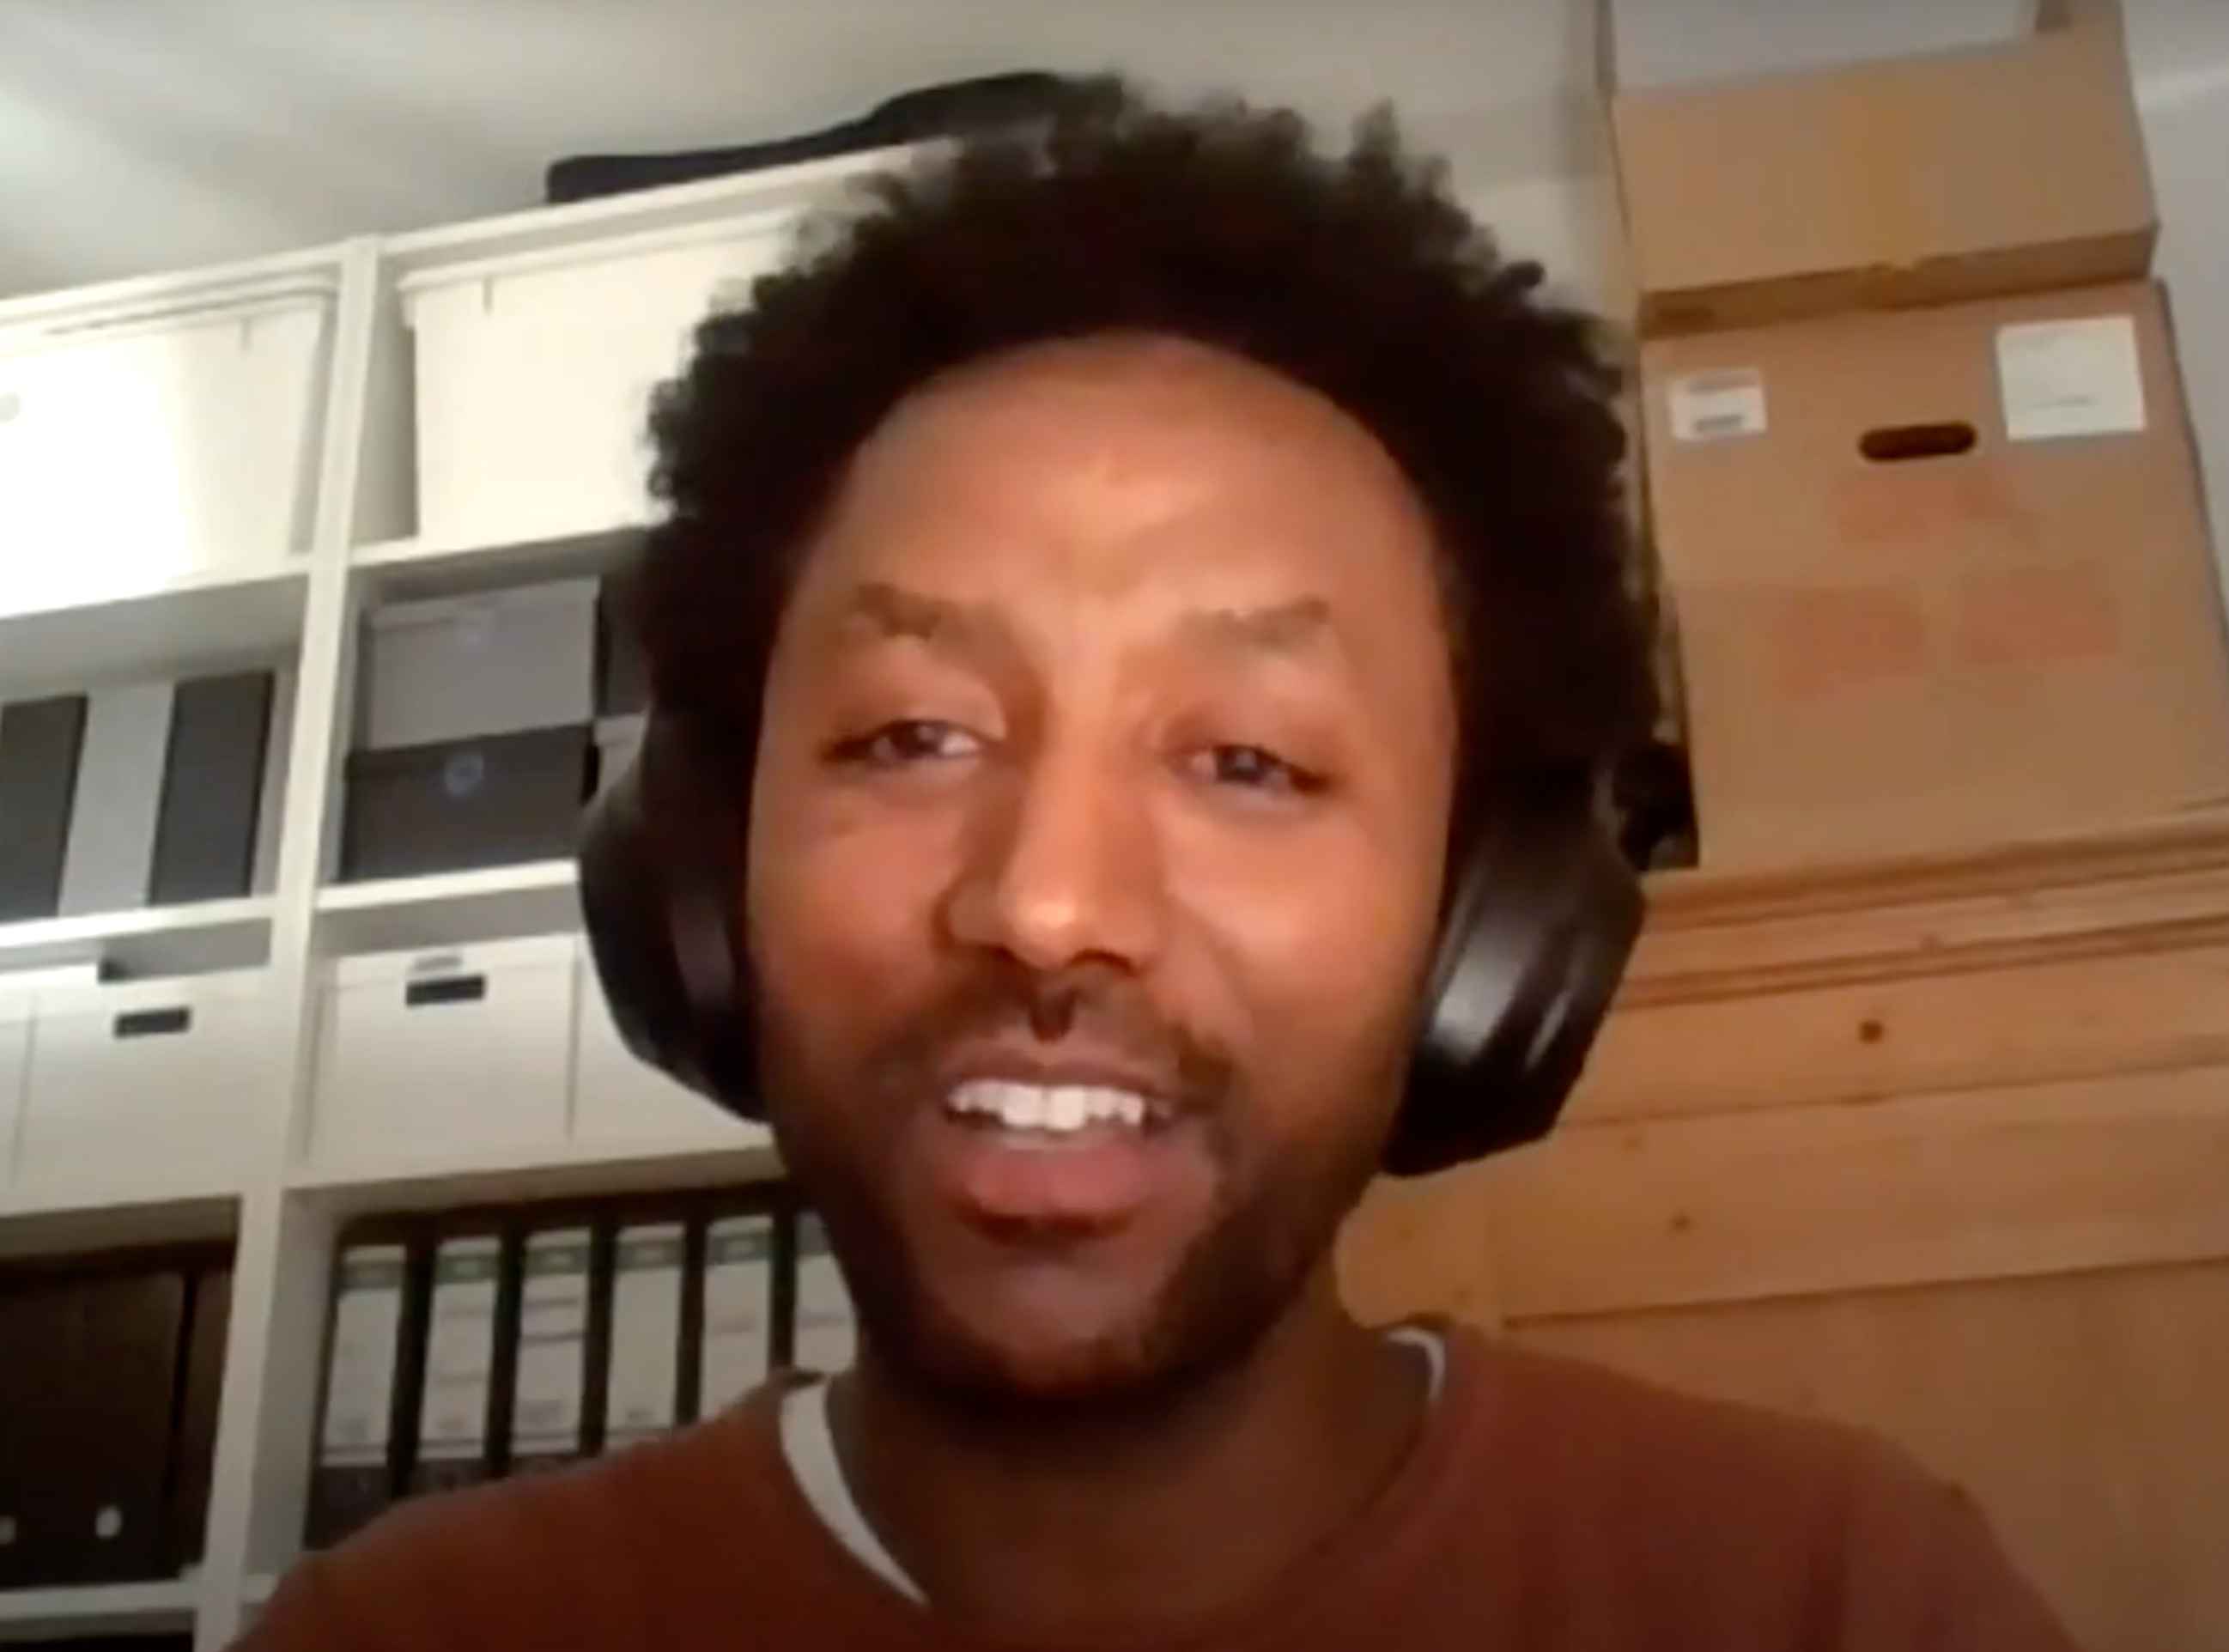 Asmelash Teka Hadgu, a Black man with medium, curly black hair, looks at the camera. He wears big, ear-covering headphones, and a reddish-brown shirt. Behind him are white storage shelves and a wooden cabinet stacked with boxes.